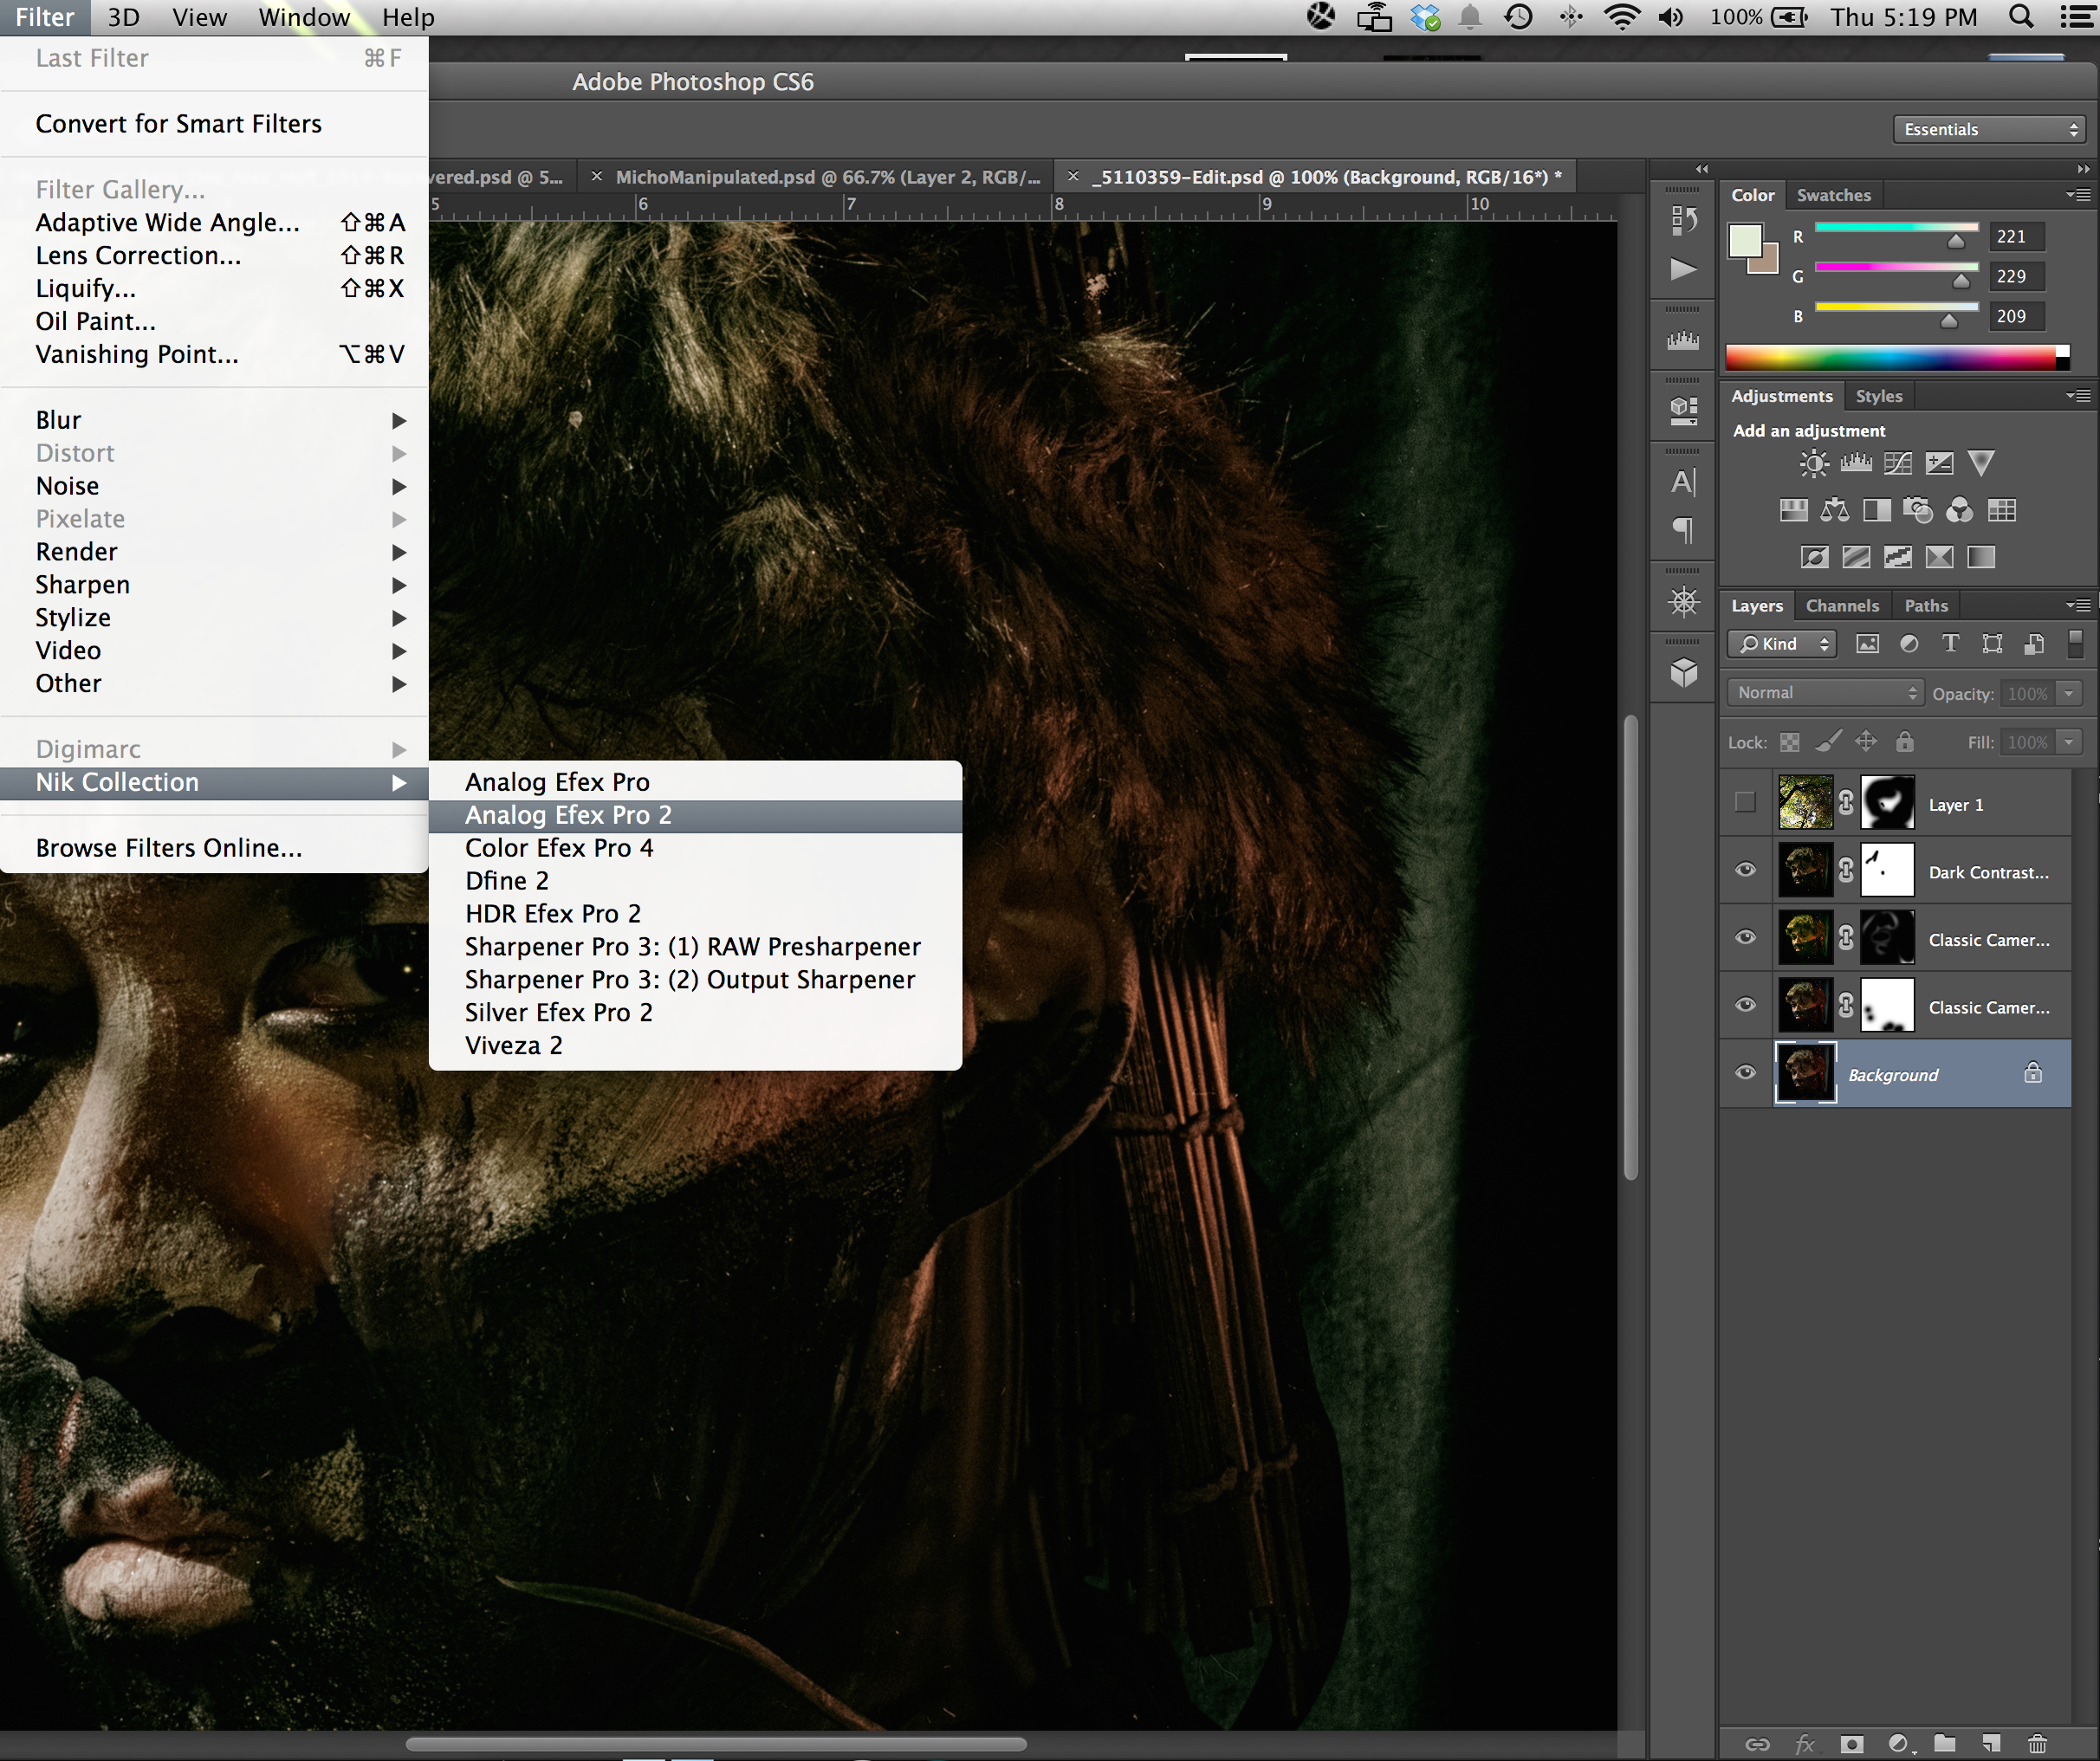 Open your image in Analog Efex Pro, as a plugin from within Photoshop